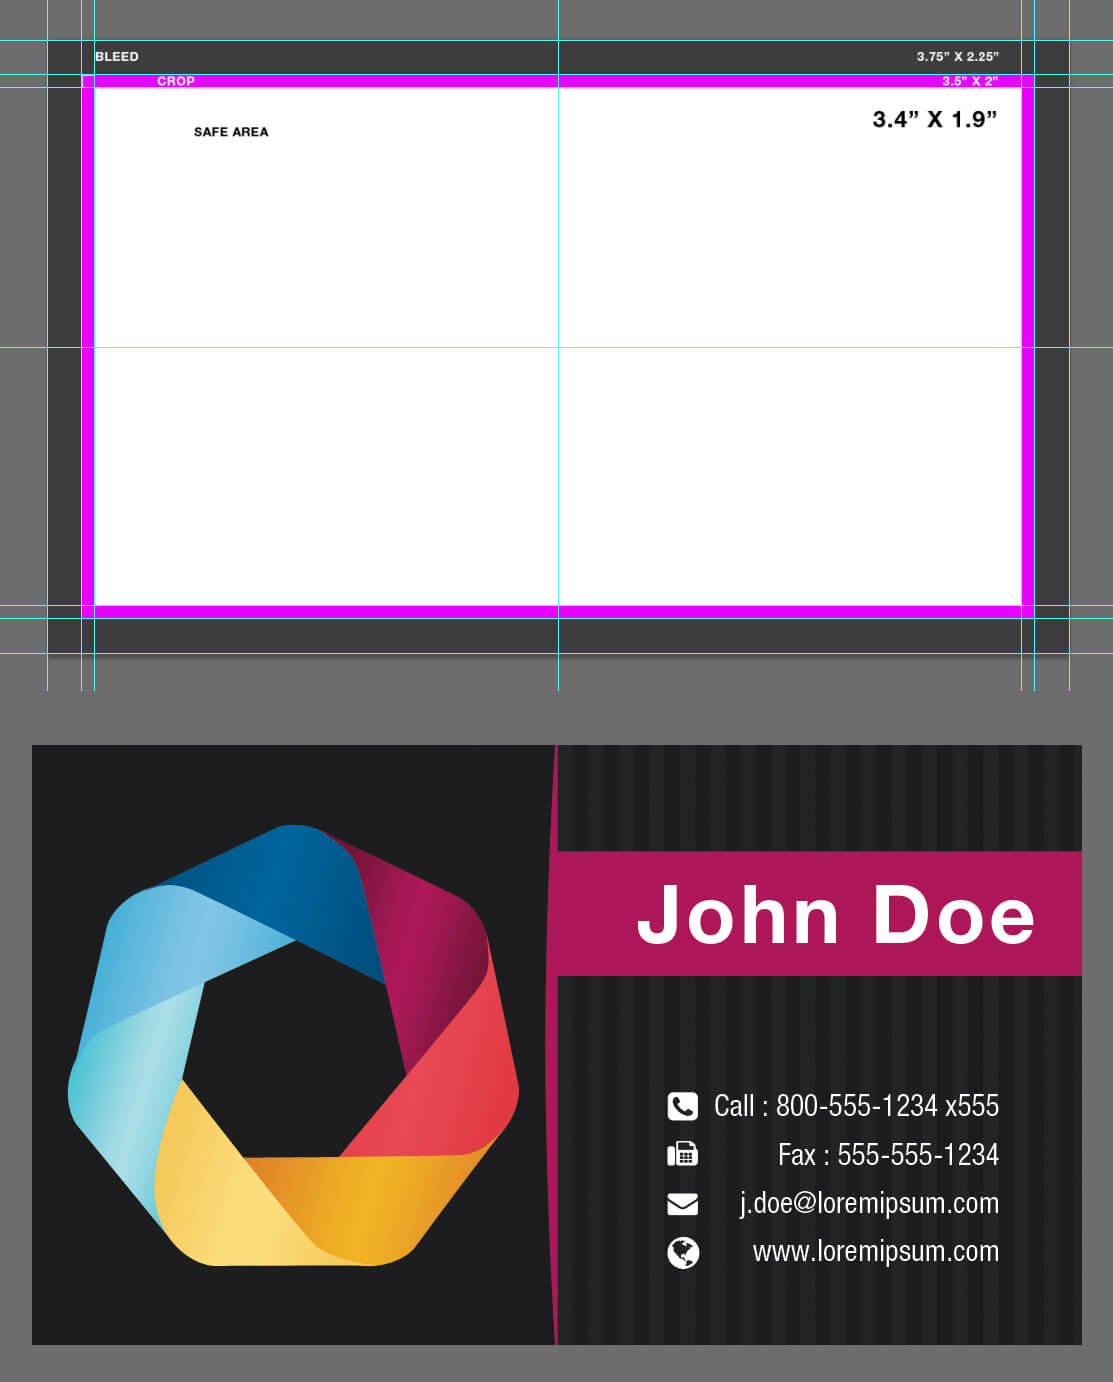 Blank Business Card Template Psdxxdigipxx On Deviantart With Regard To Photoshop Business Card Template With Bleed